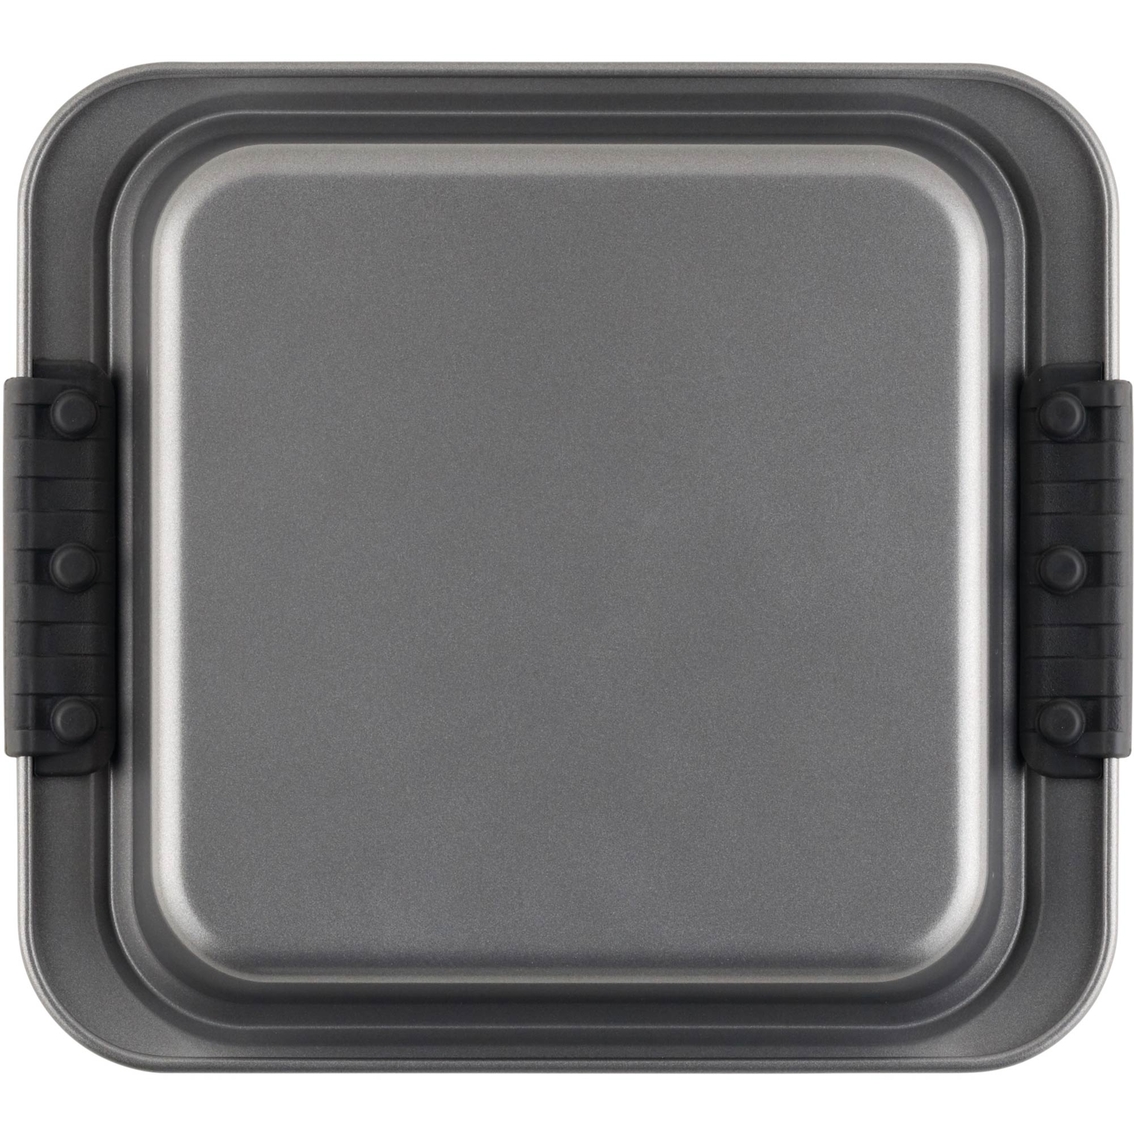 Anolon Advanced Nonstick Bakeware 9 in. Square Silicone Grips Cake Pan - Image 4 of 4